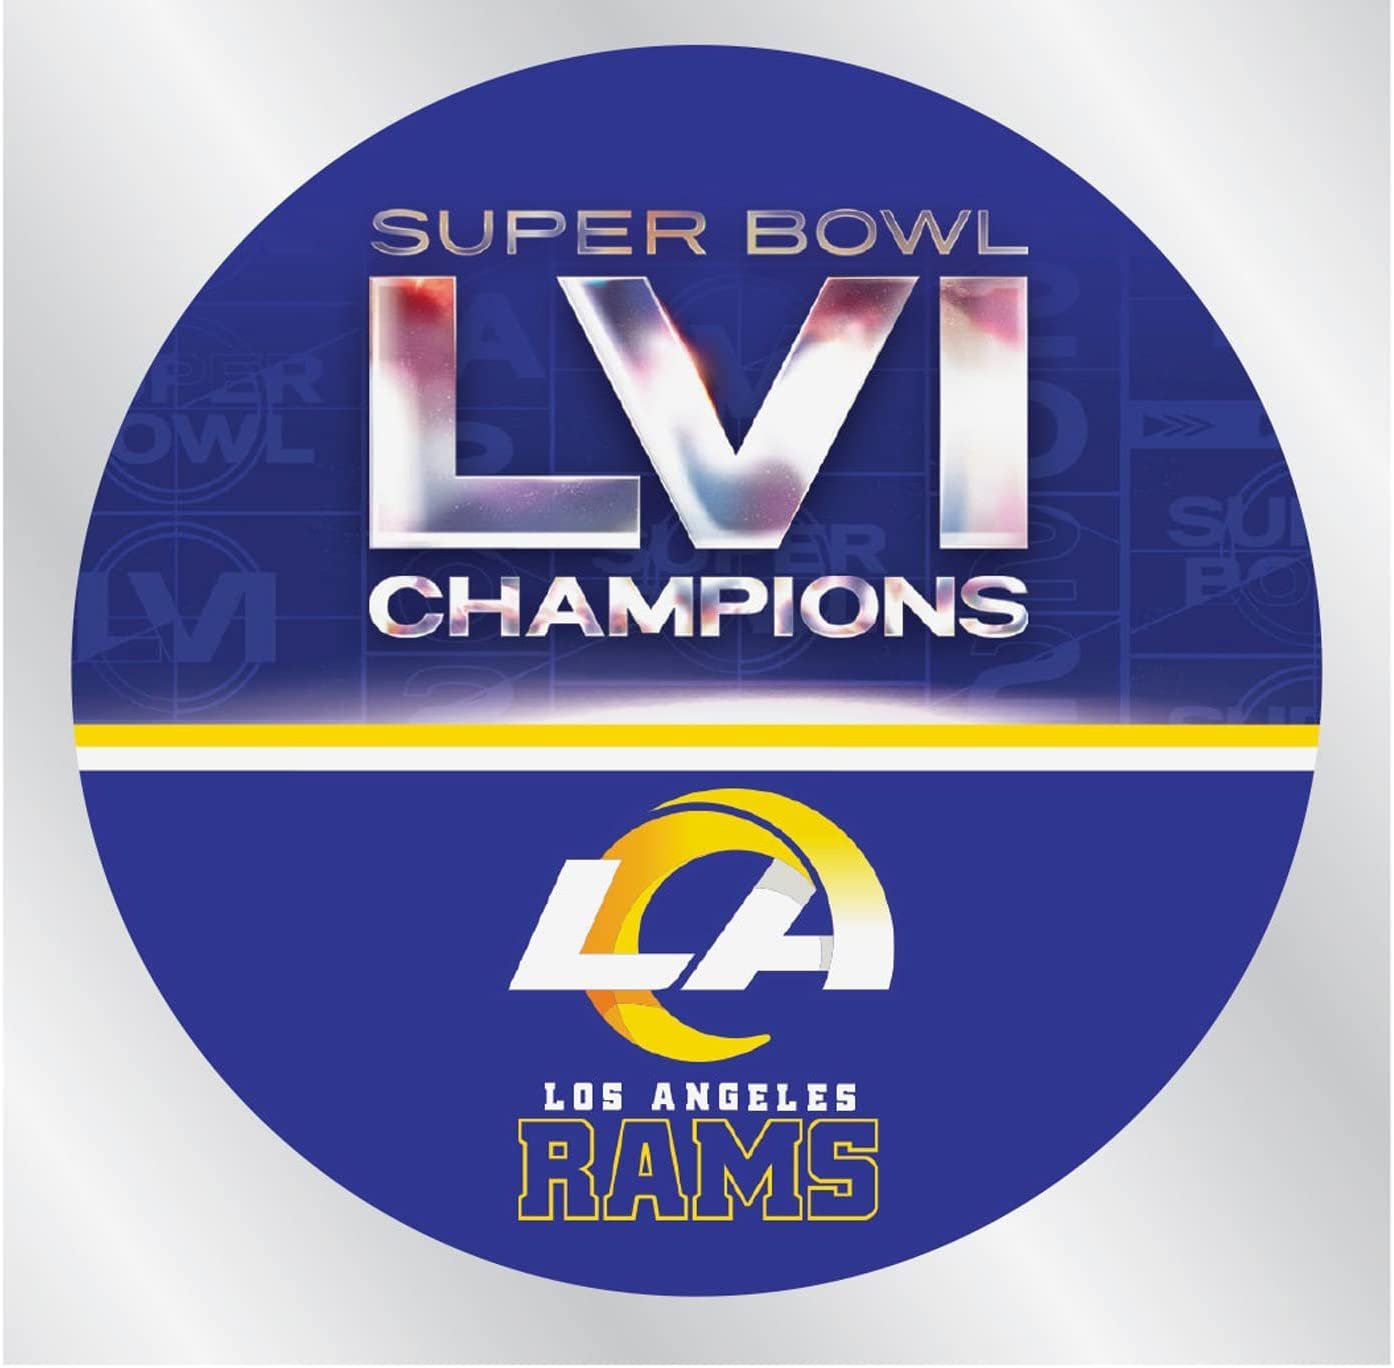 Los Angeles Rams 2022 Super Bowl LVI Champions 4x4 Inch Die Cut Decal Sticker Clear Backing